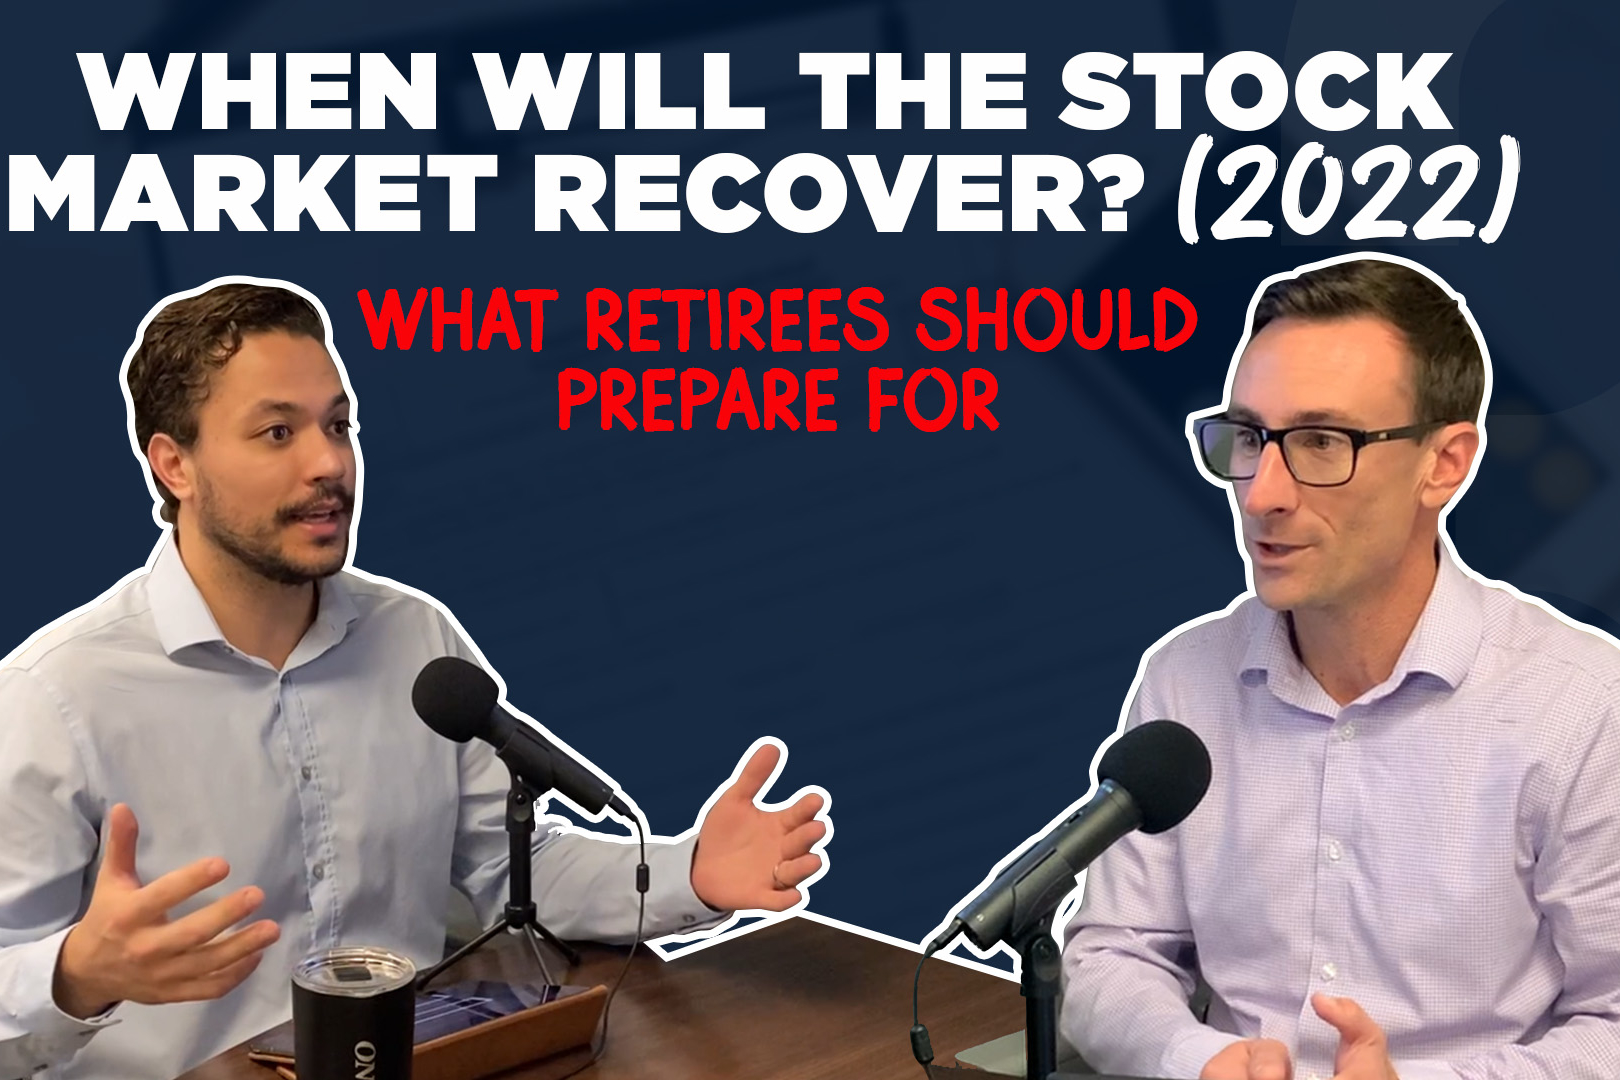 When Will the Stock Market Recover?